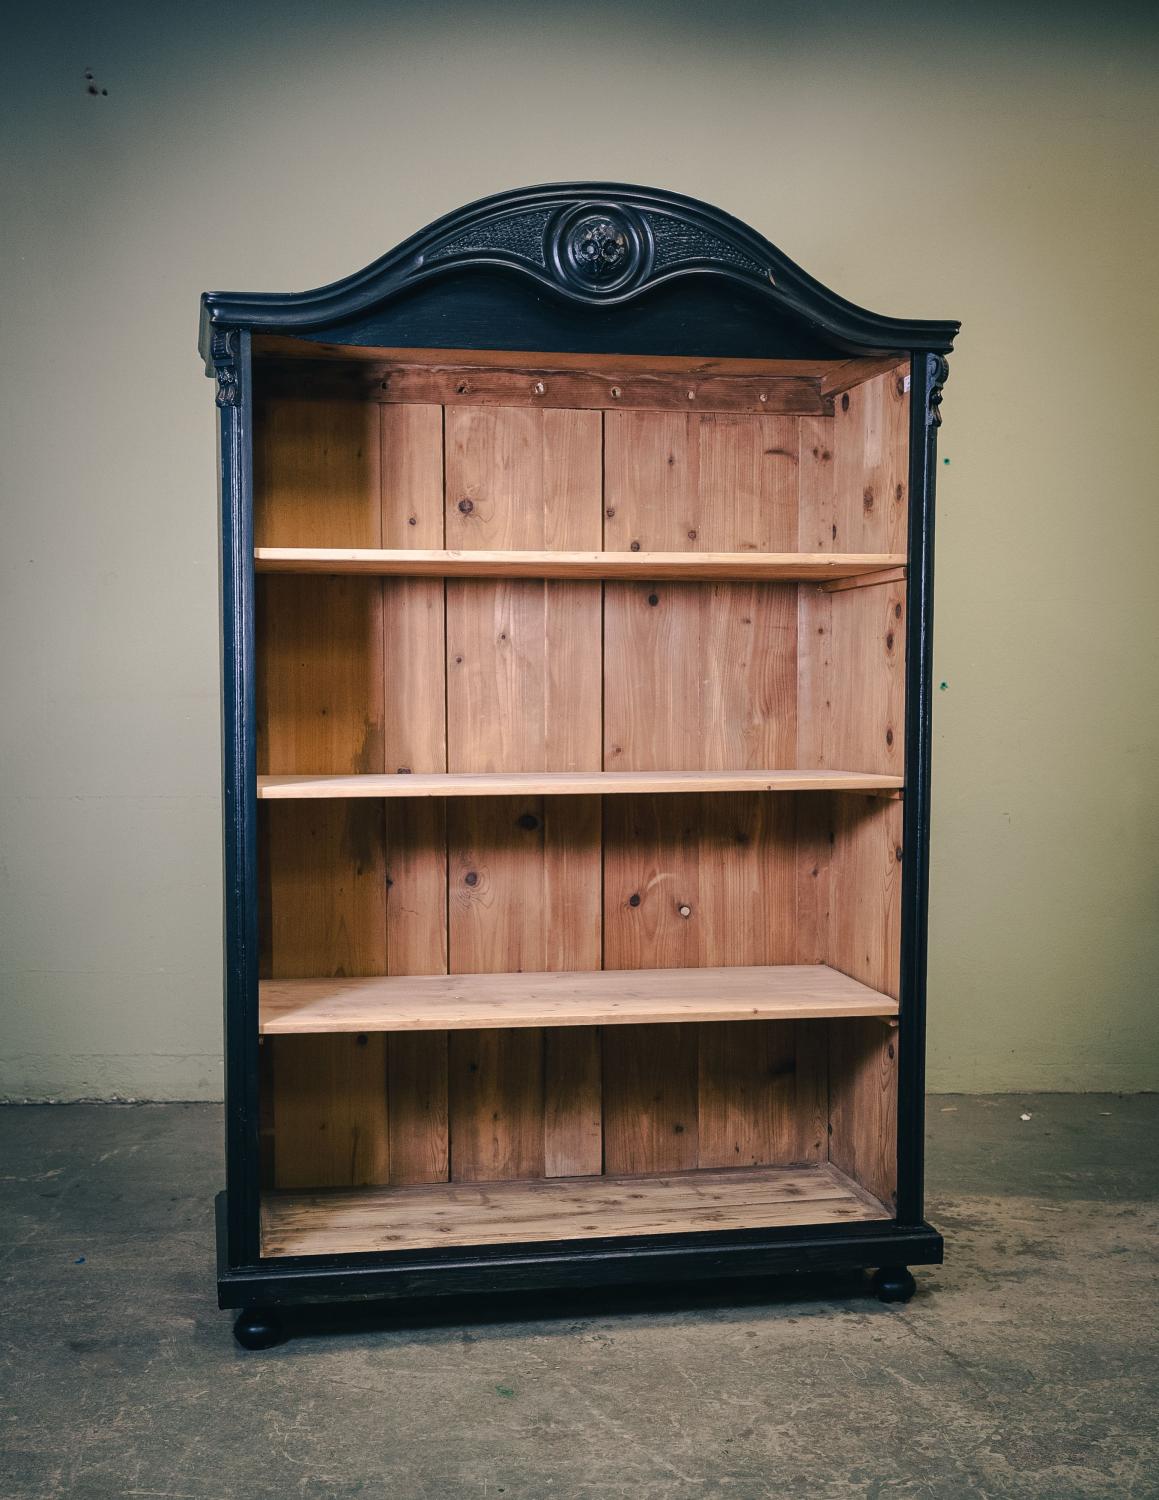 Black Renovated Vintage Cabinet from the 1920s